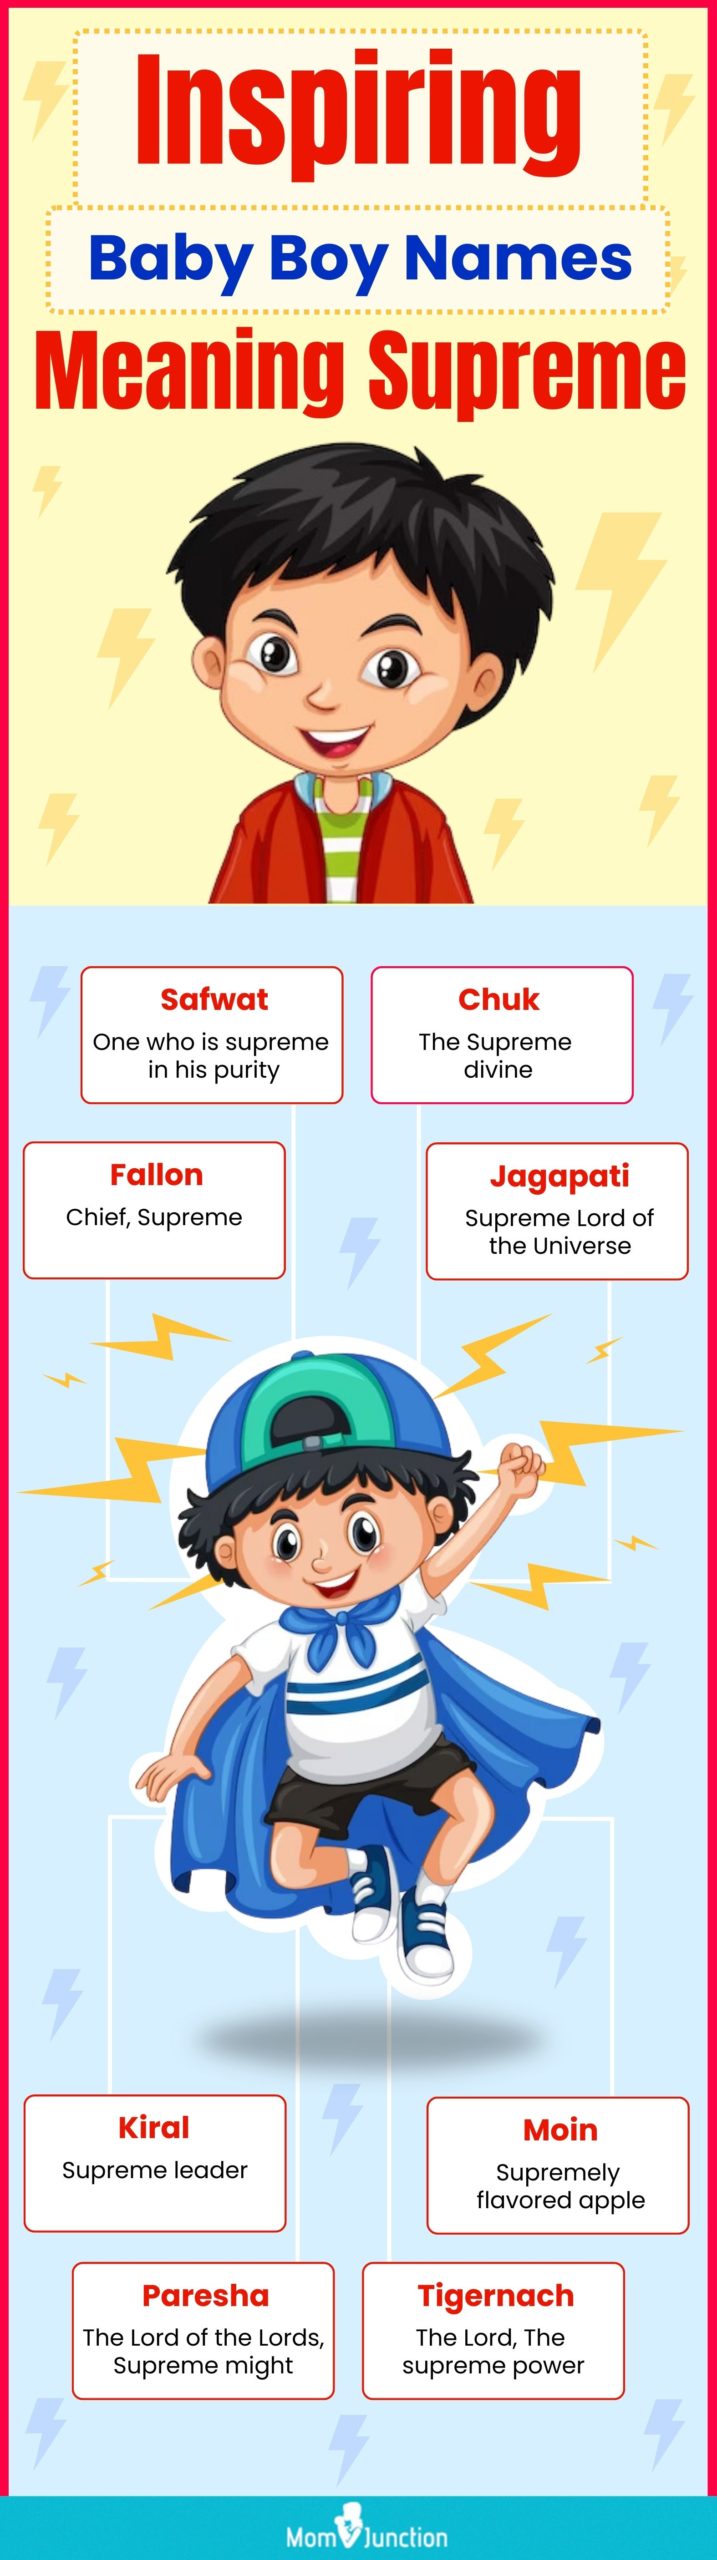 inspiring baby boy names meaning supreme (infographic)